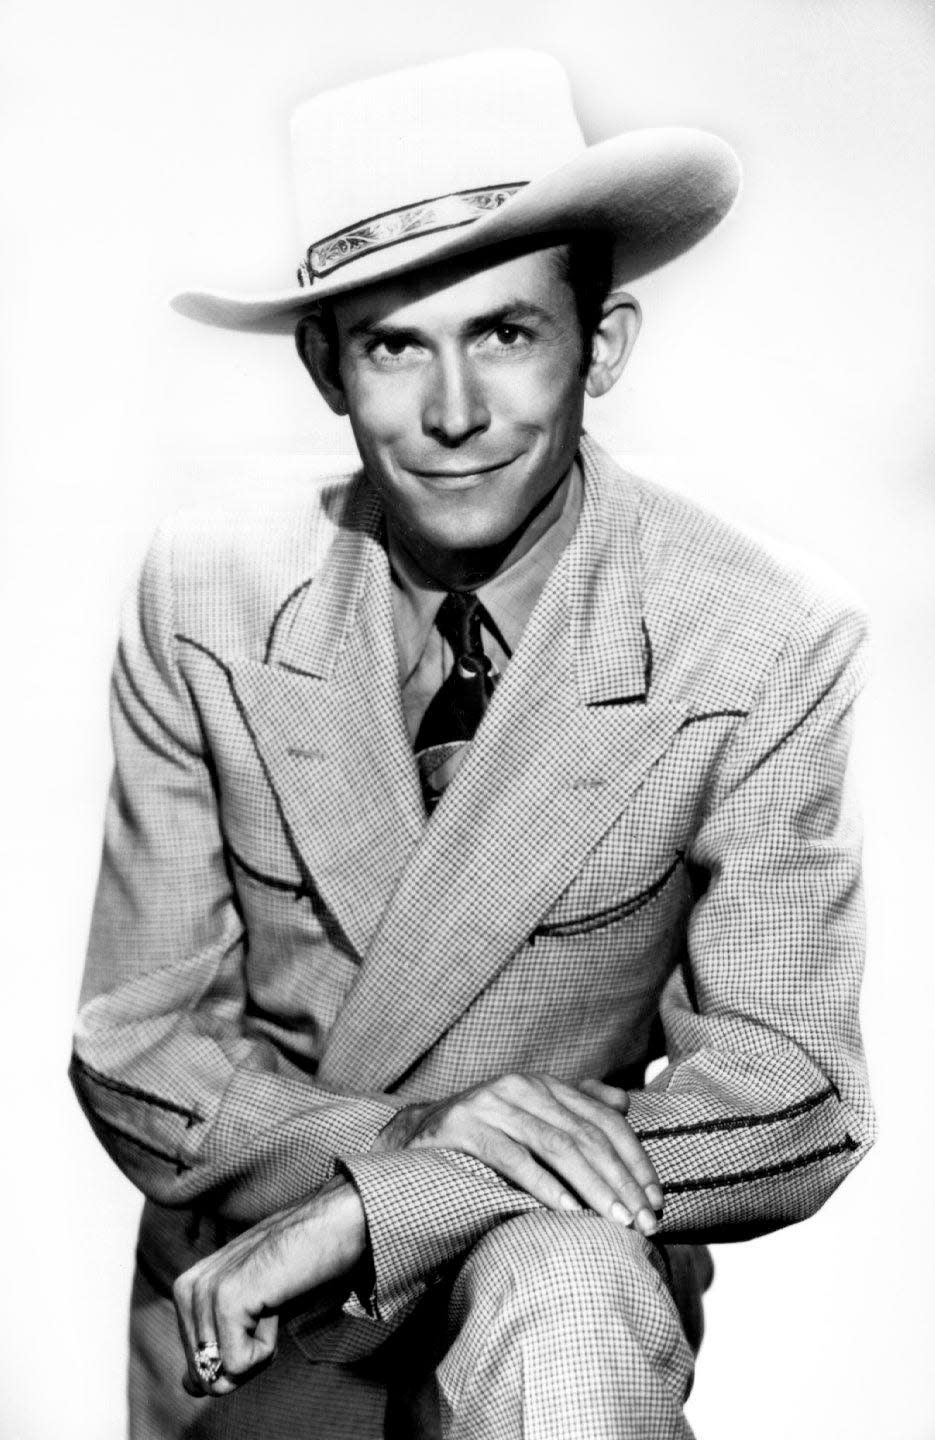 Hank Williams had his first big hit with 